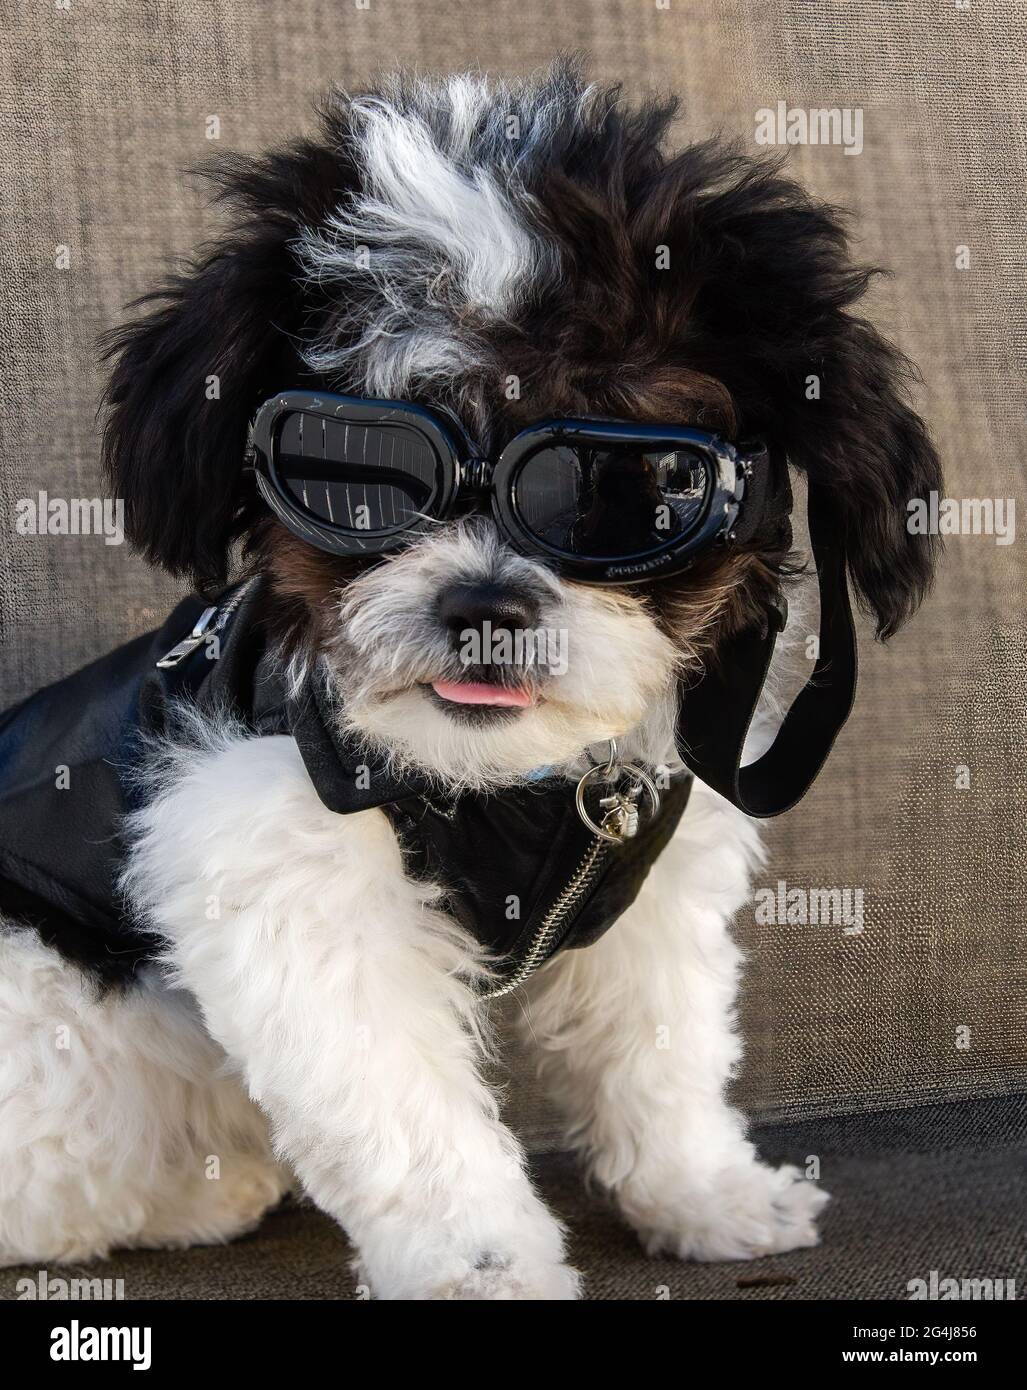 Small, black and white puppy wearing sunglasses and a leather jacket with his pink tongue out. Stock Photo